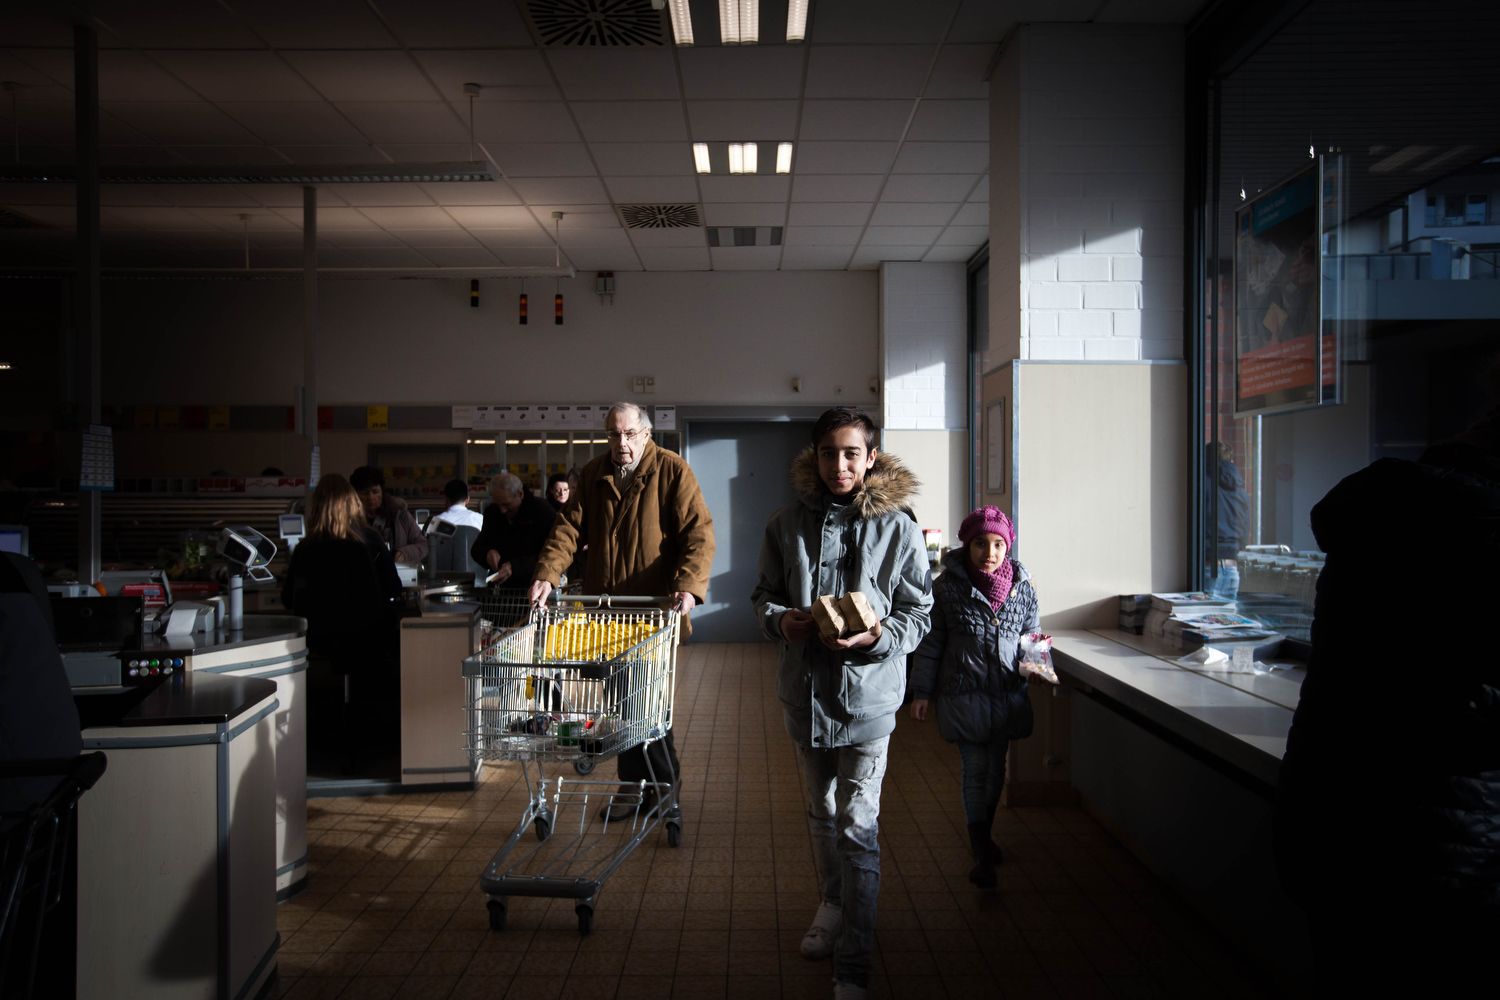 Milad and Mahya at the Aldi Süd discount supermarket in Düsseldorf. The Ahkabyars often shop as far as forty minutes away in order to save money on produce. Image by Diana Markosian. Germany, 2017.